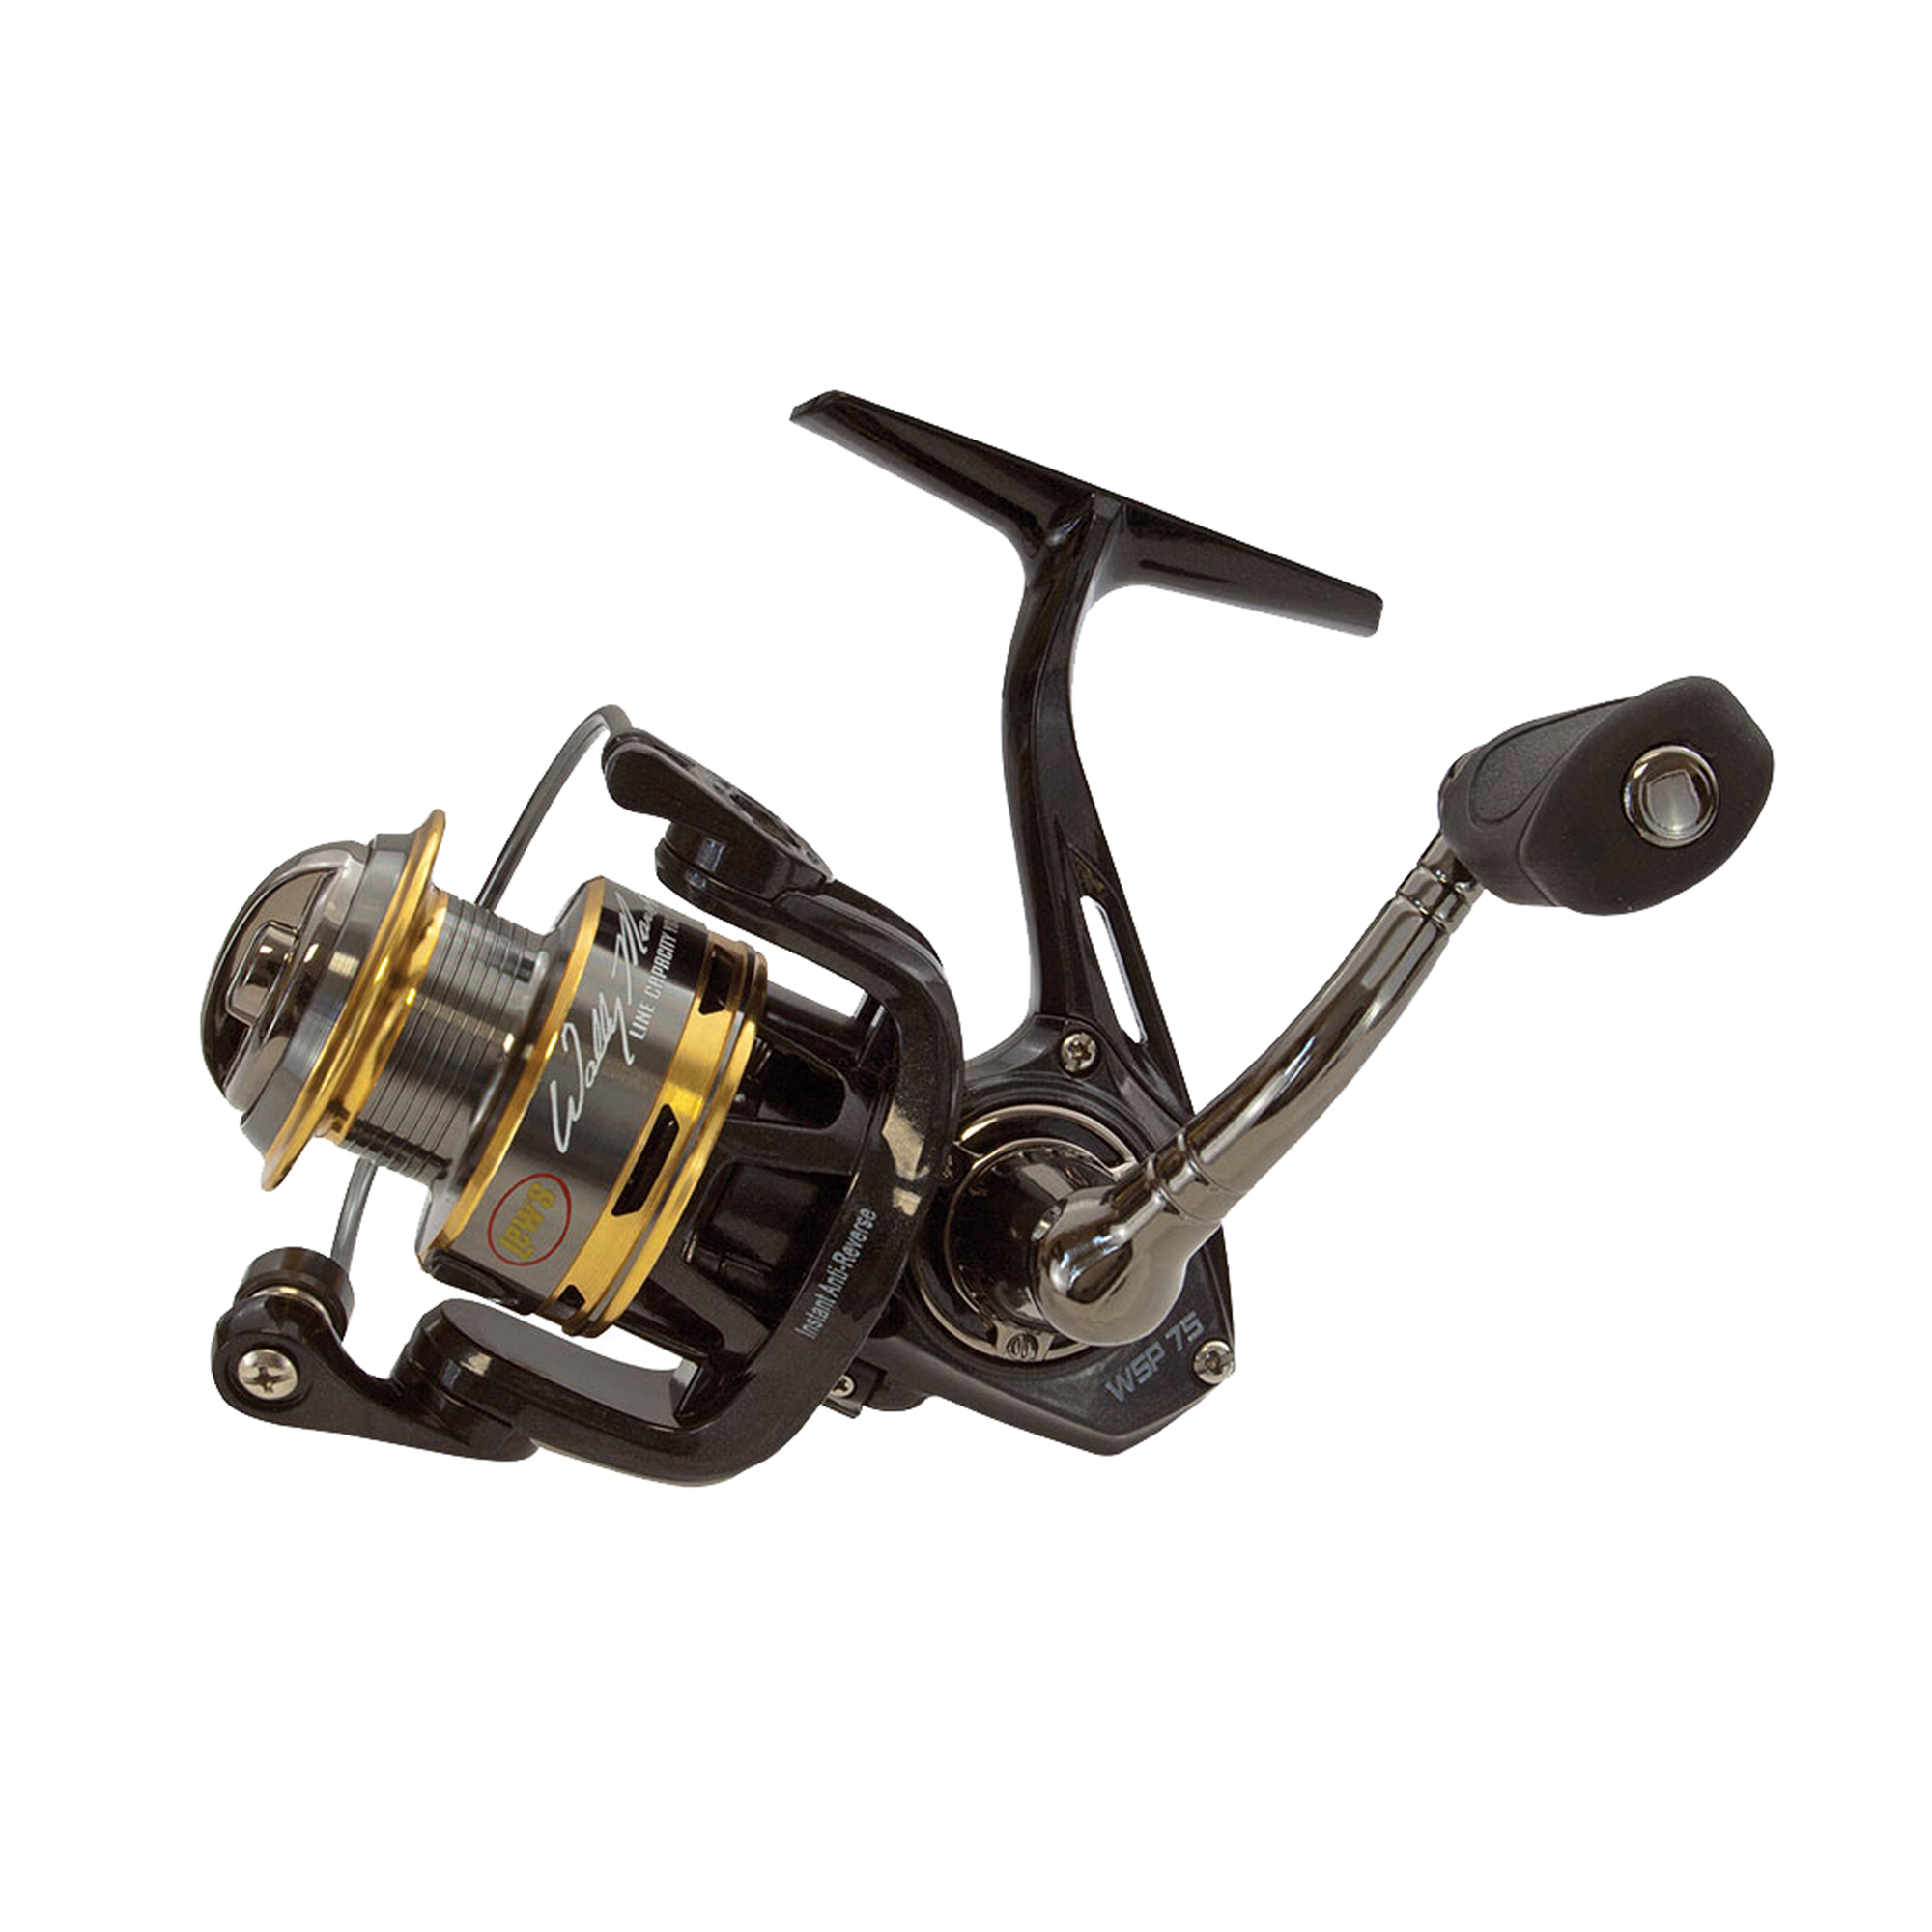 Mr. Crappie Wally Marshall Signature Series Spinning Reel